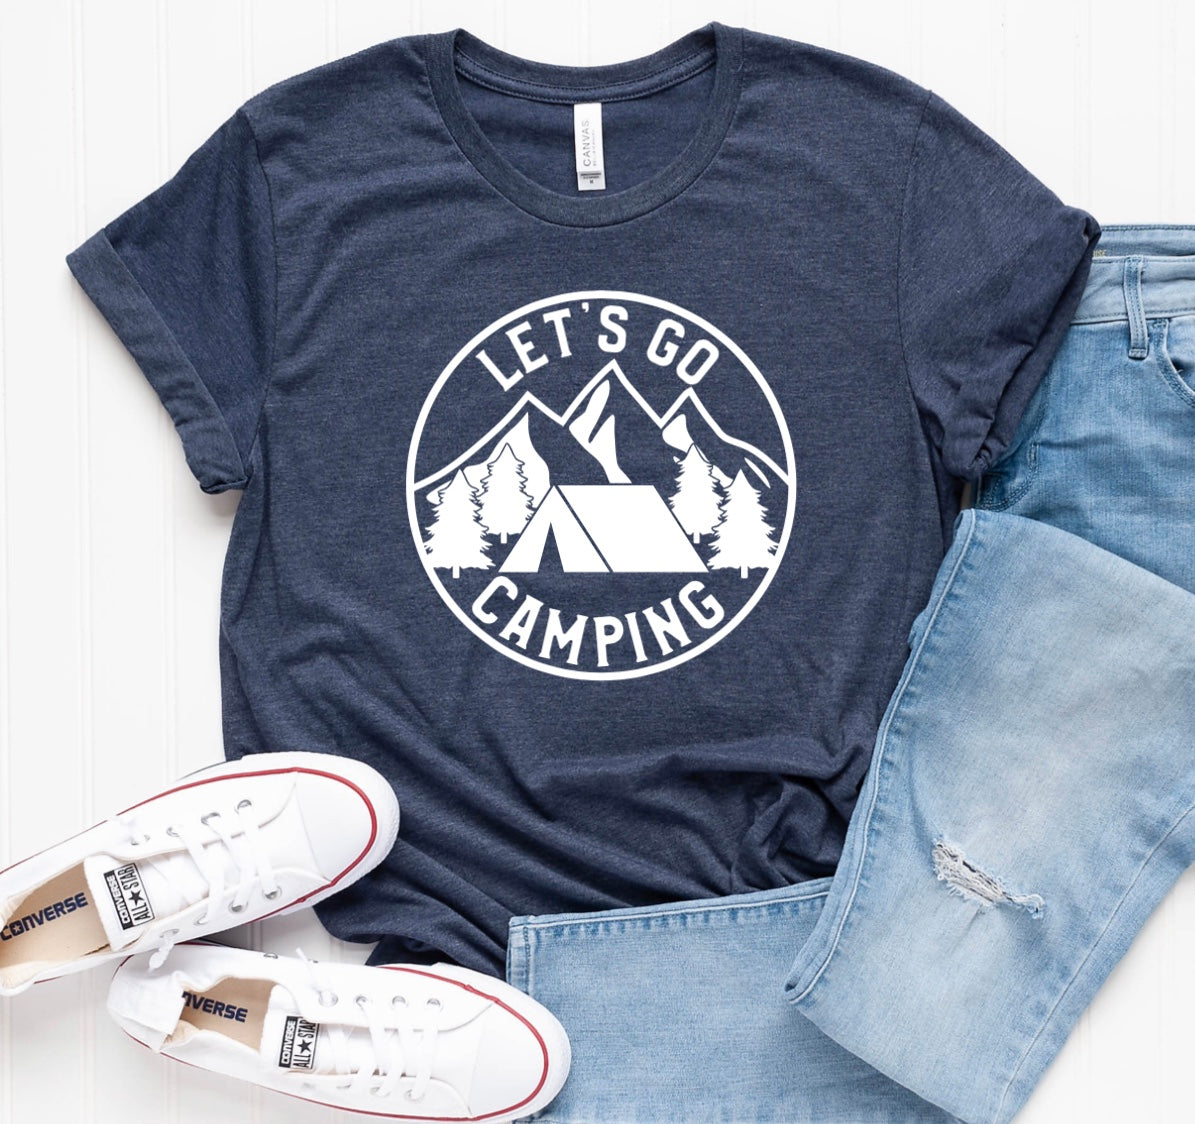 Let’s Go Camping t-shirt 